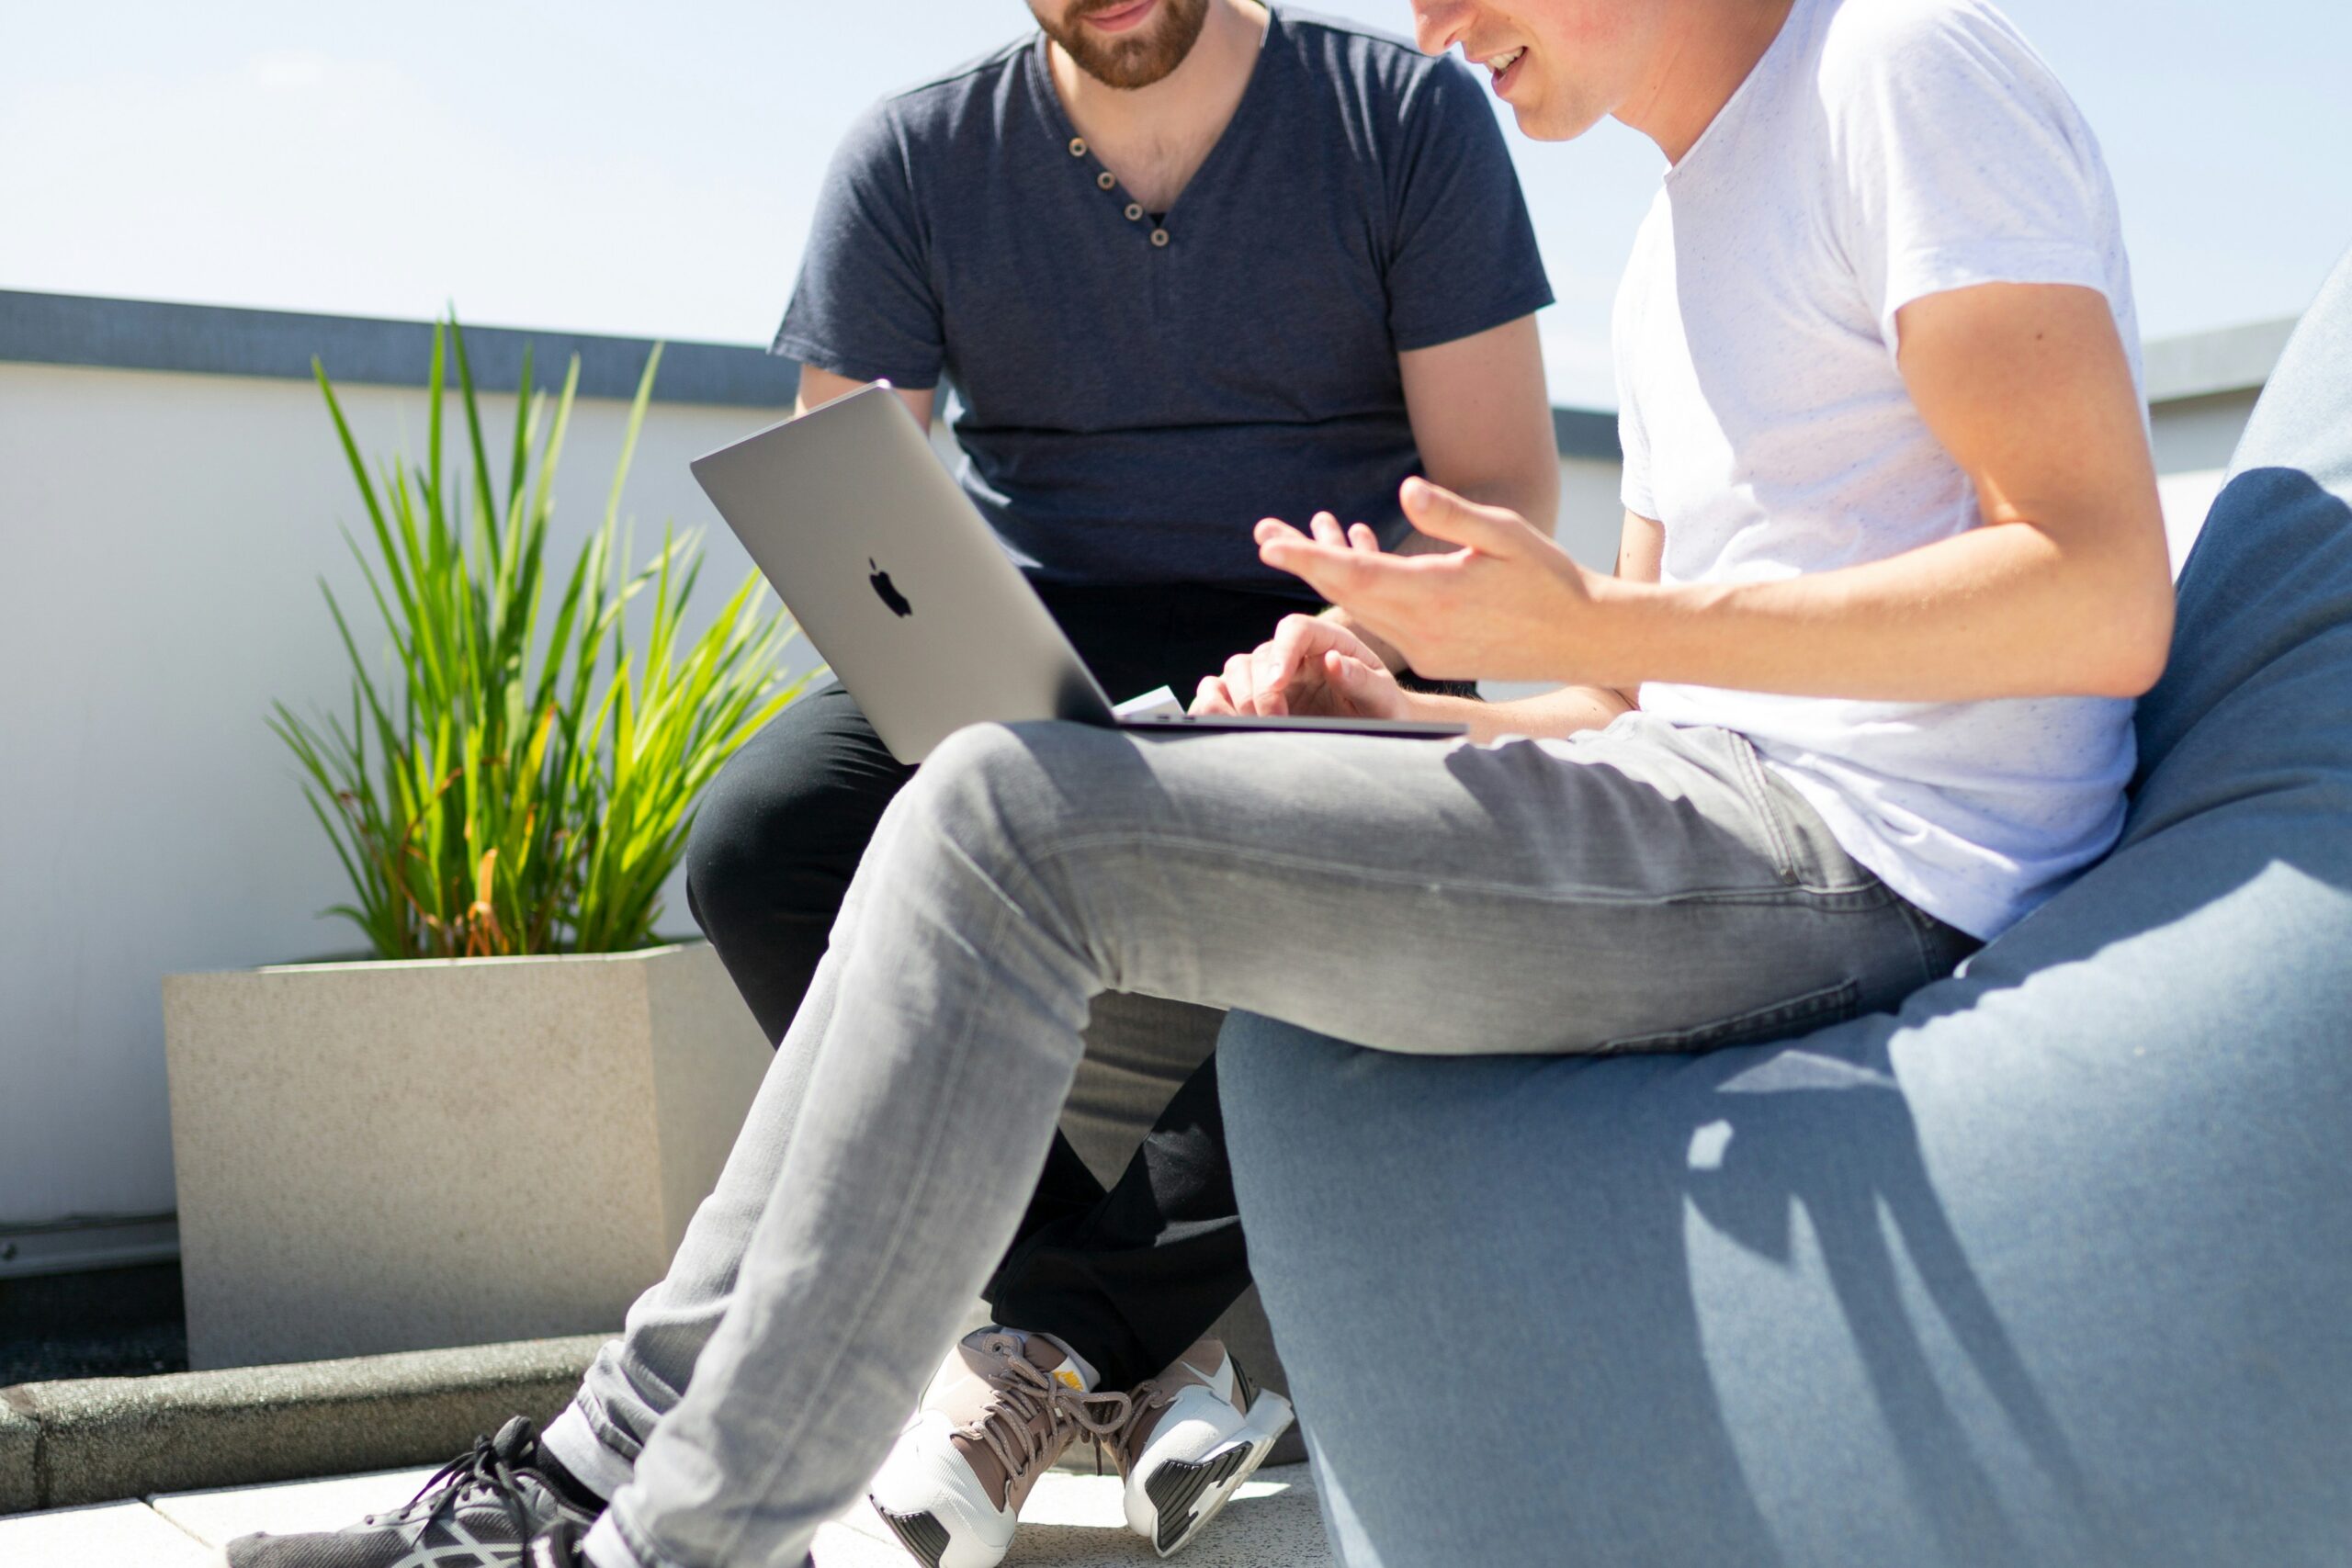 Two individuals in casual attire having a discussion about managed services benefits with a laptop outdoors.